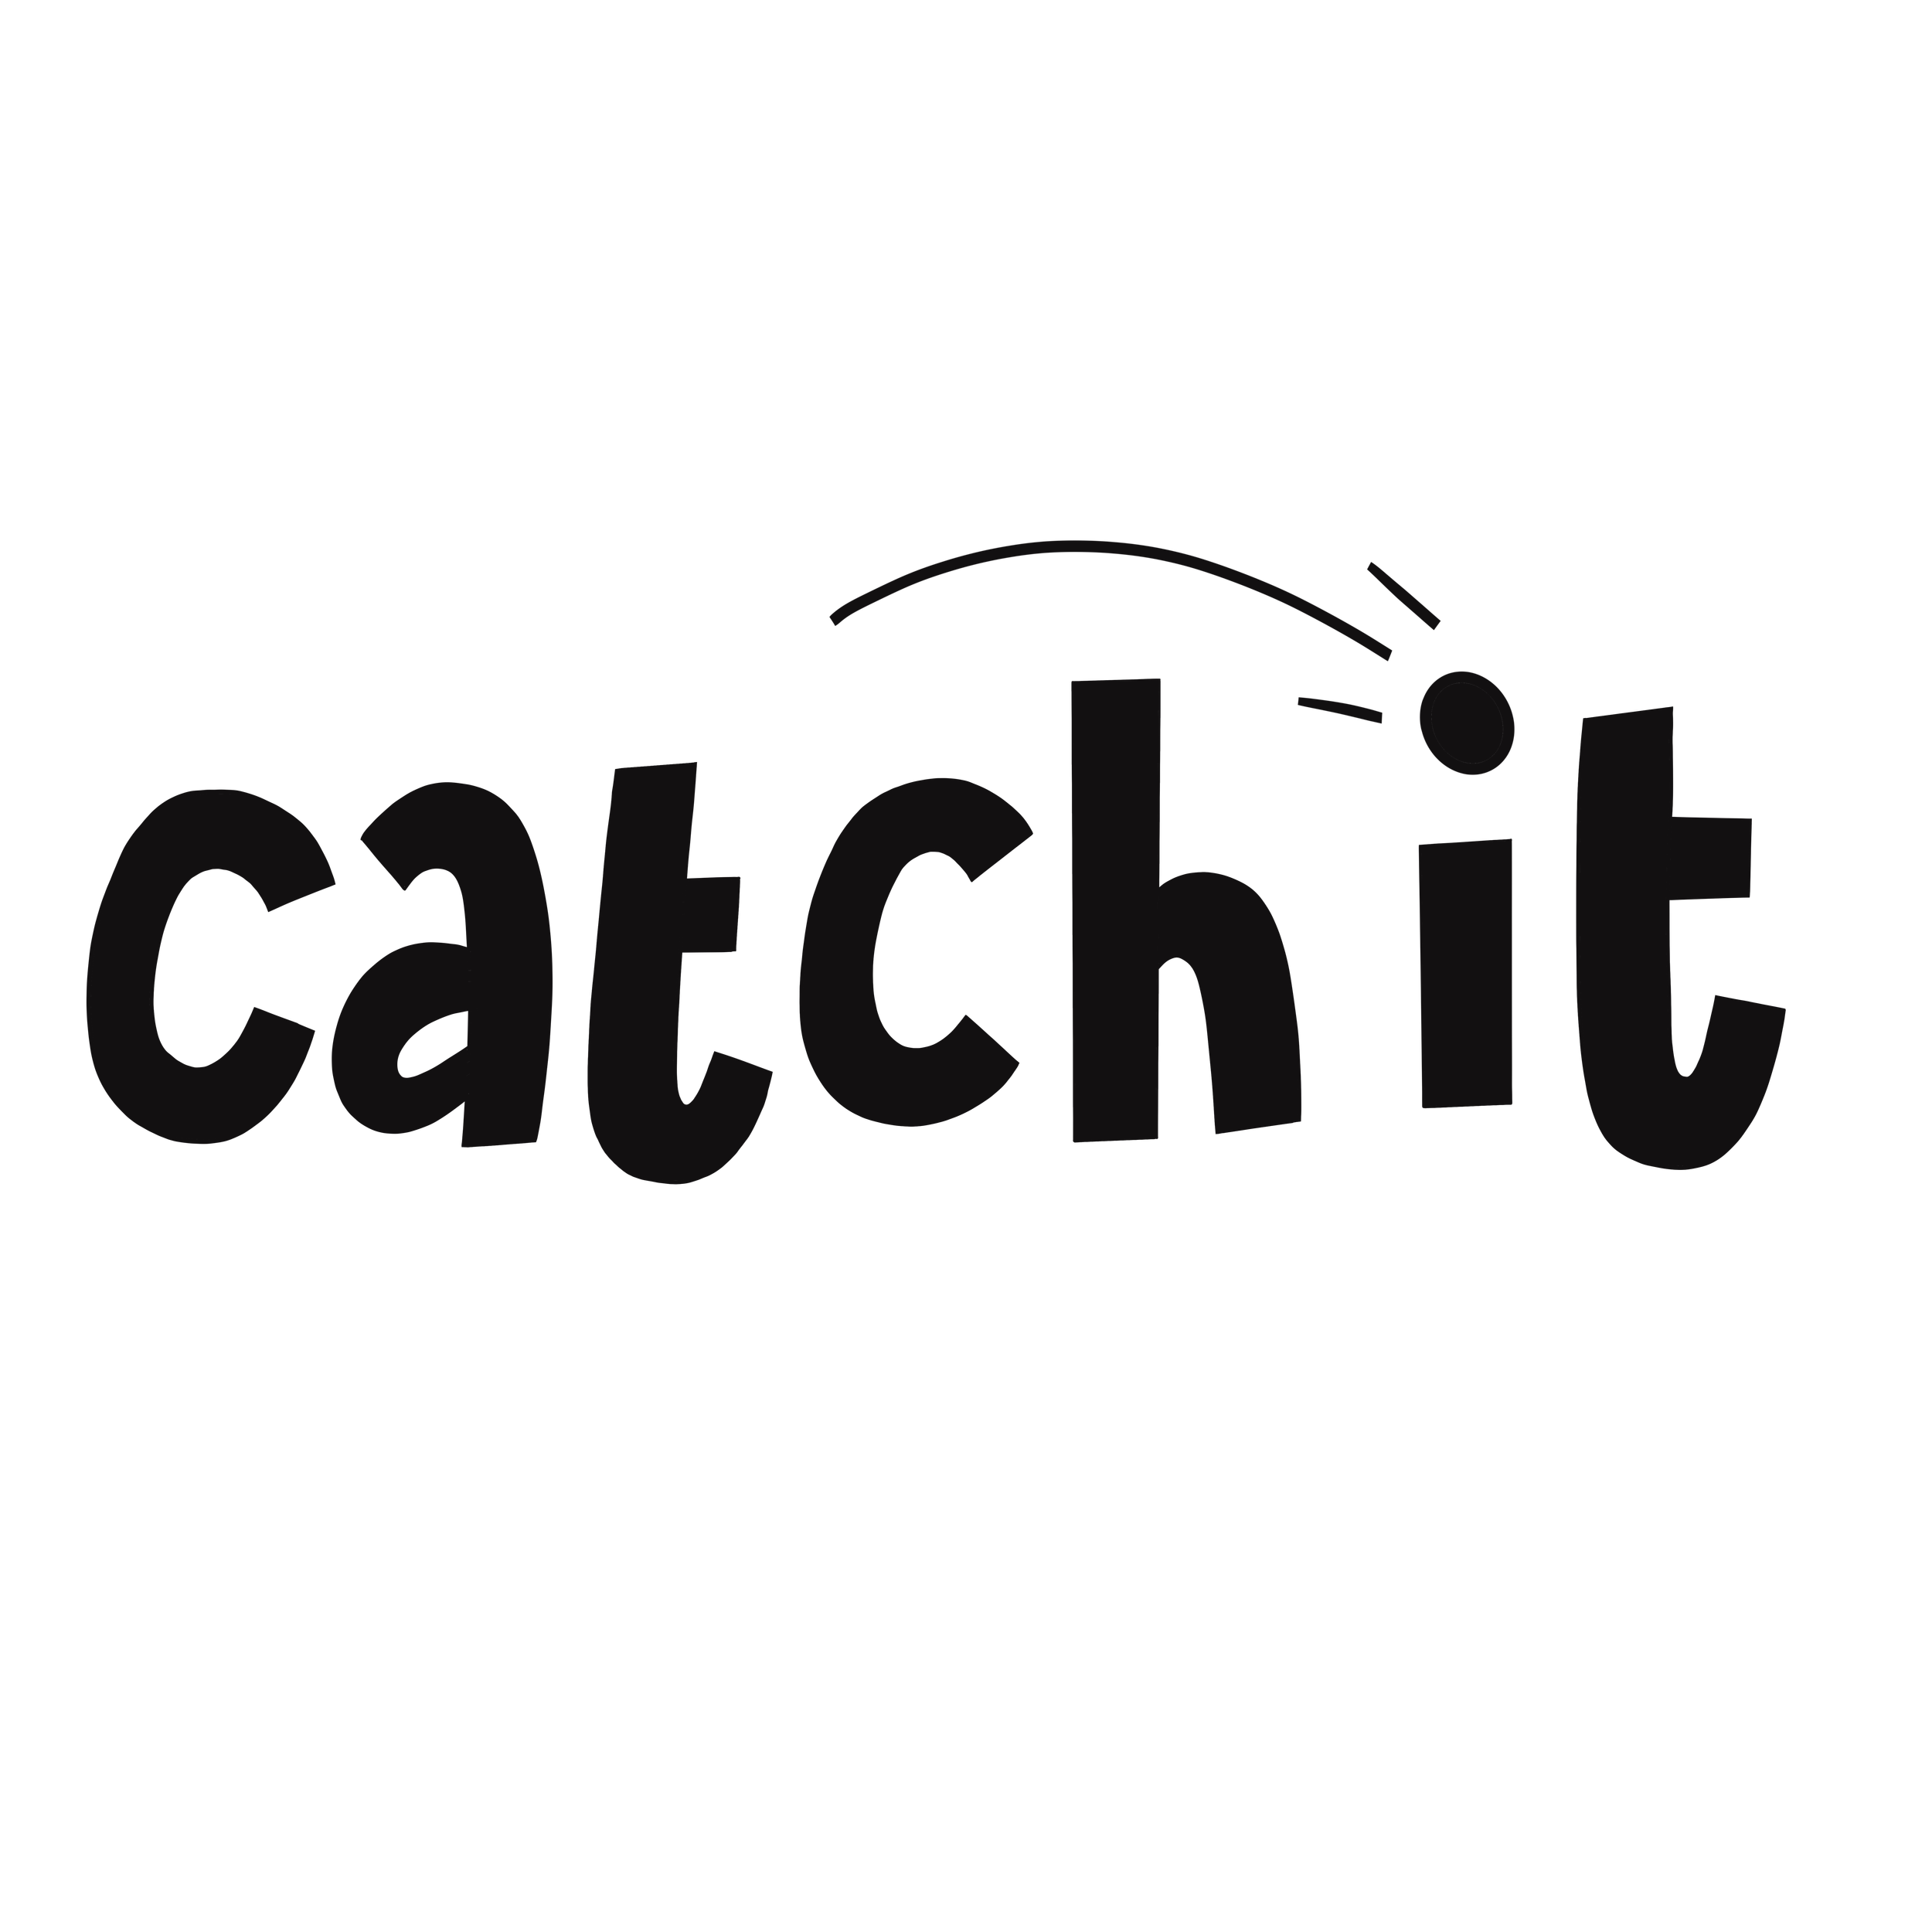 Catch_It 3.png